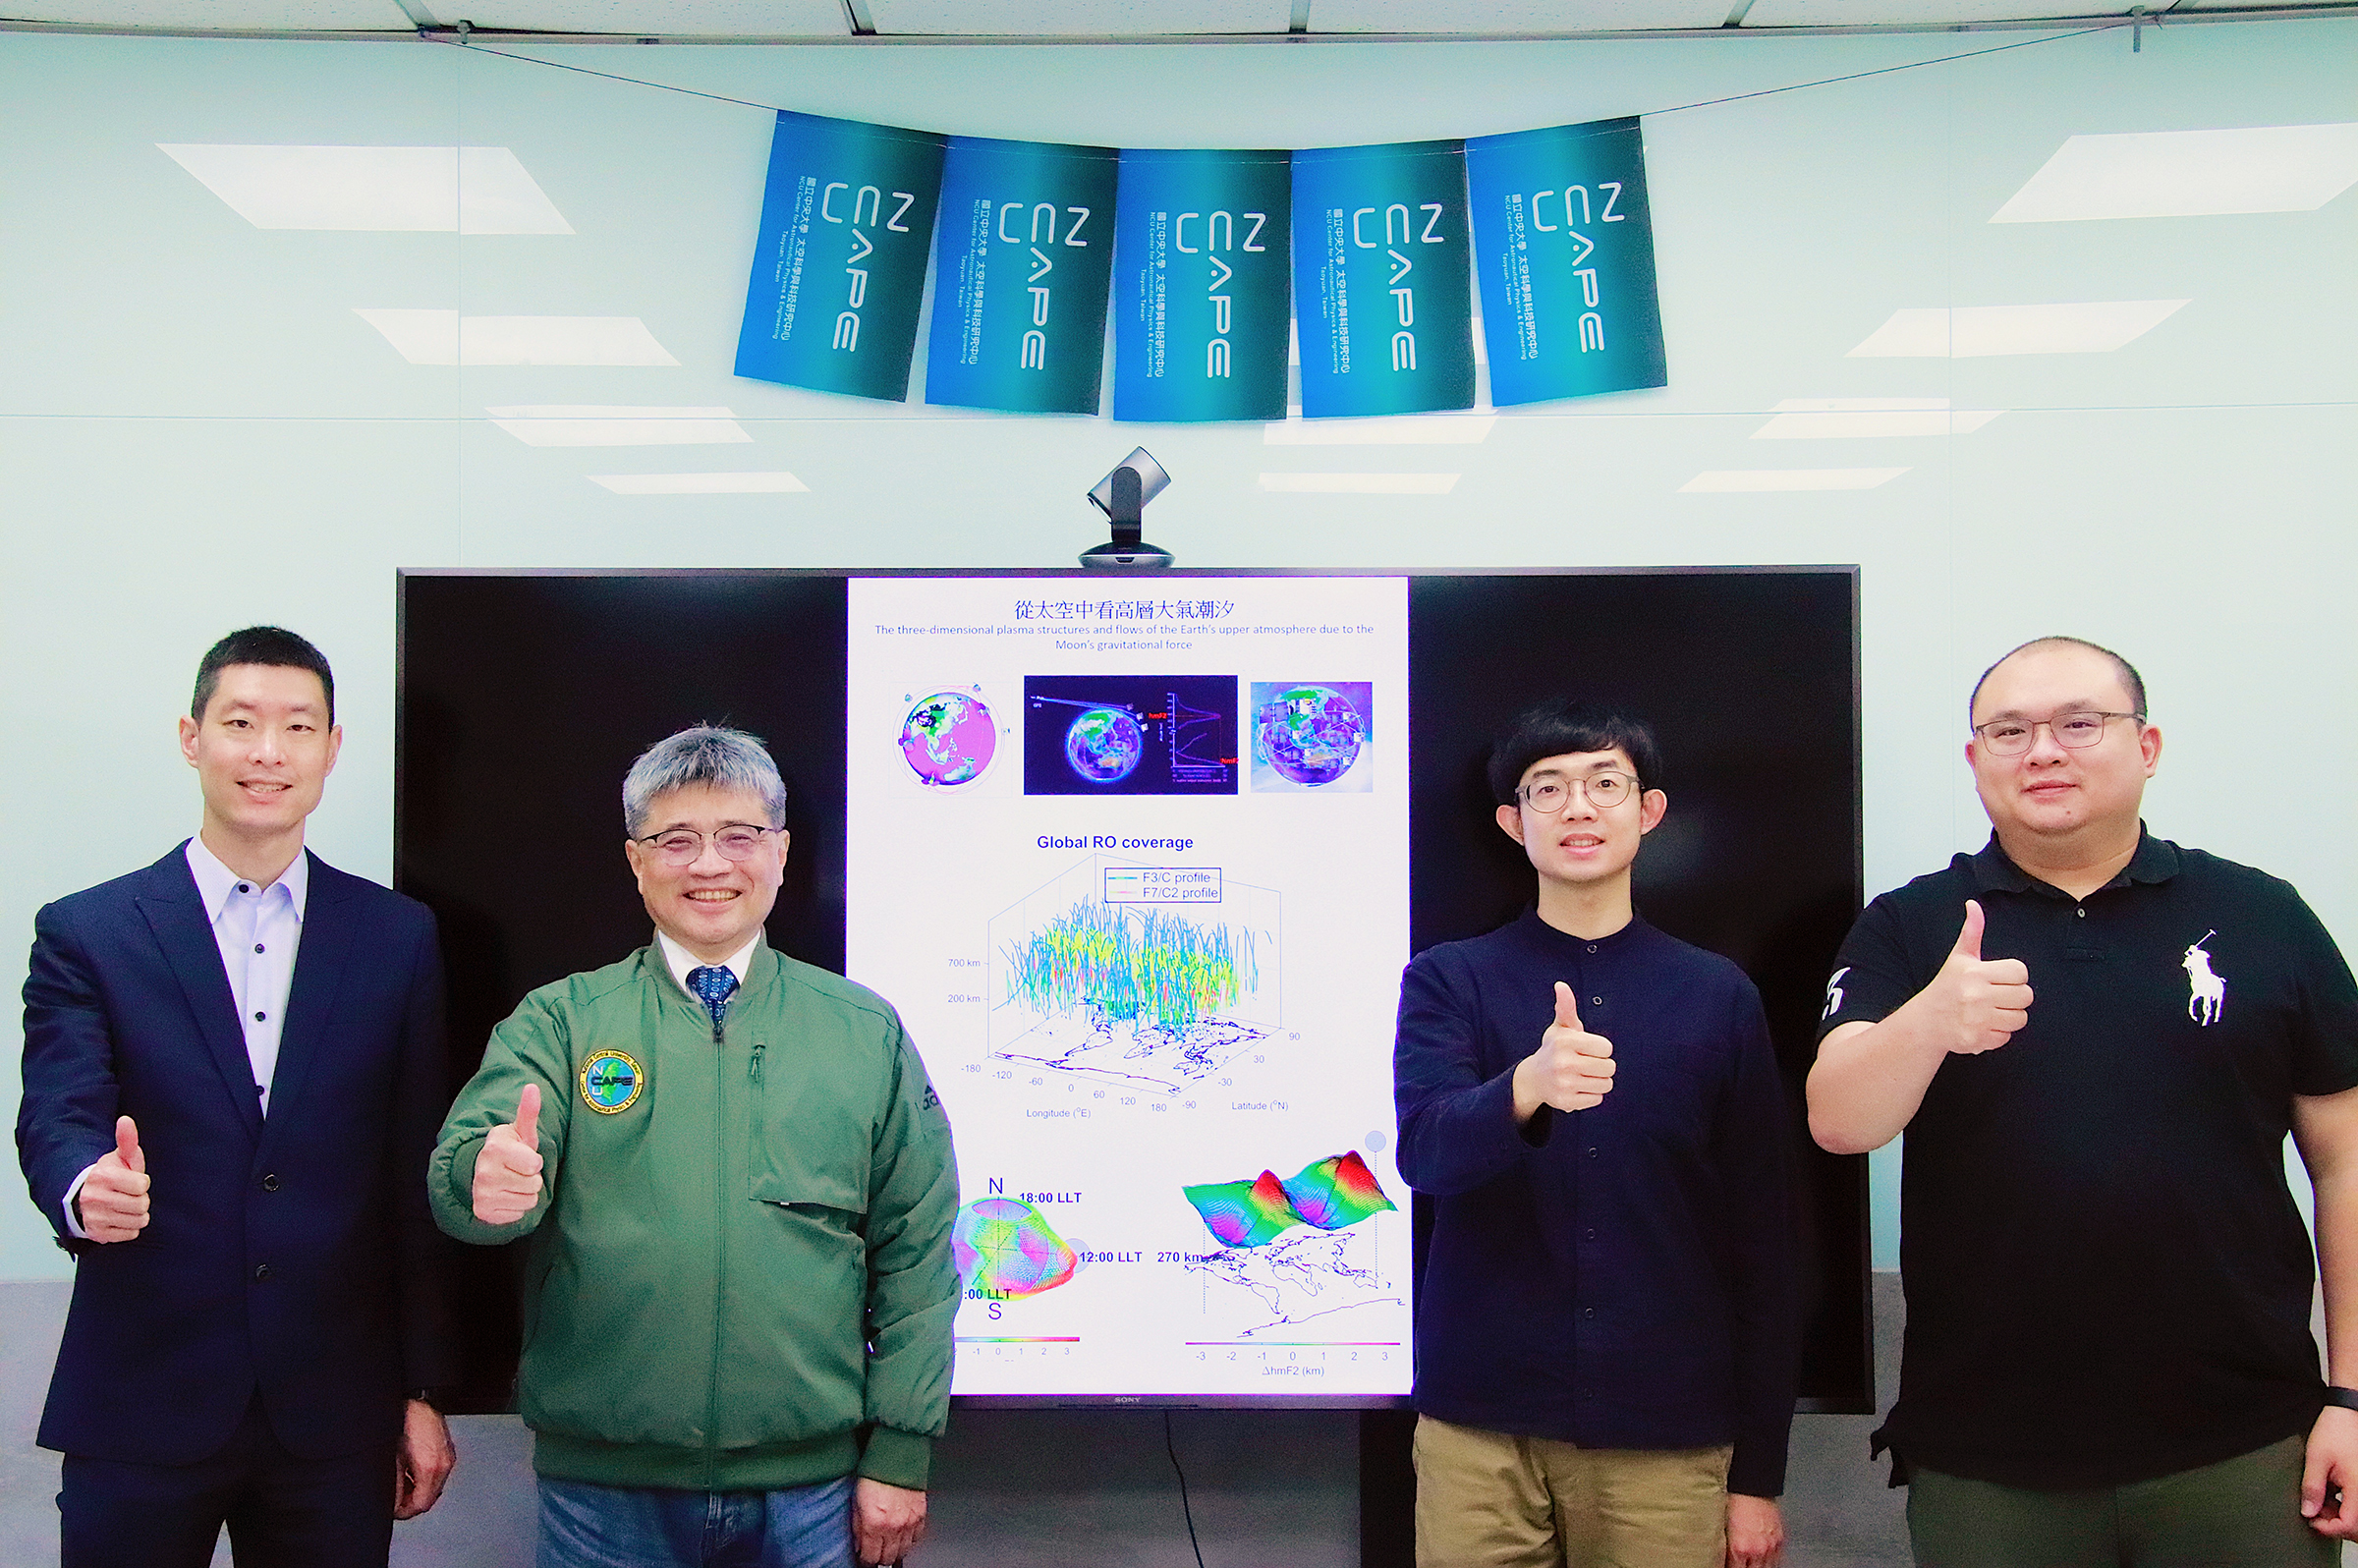 Enormous Variations in the Ionospheric Amplitude Caused by the Moon’s Gravitational Force: A Significant Discovery by NCU’s Space Science Research Team